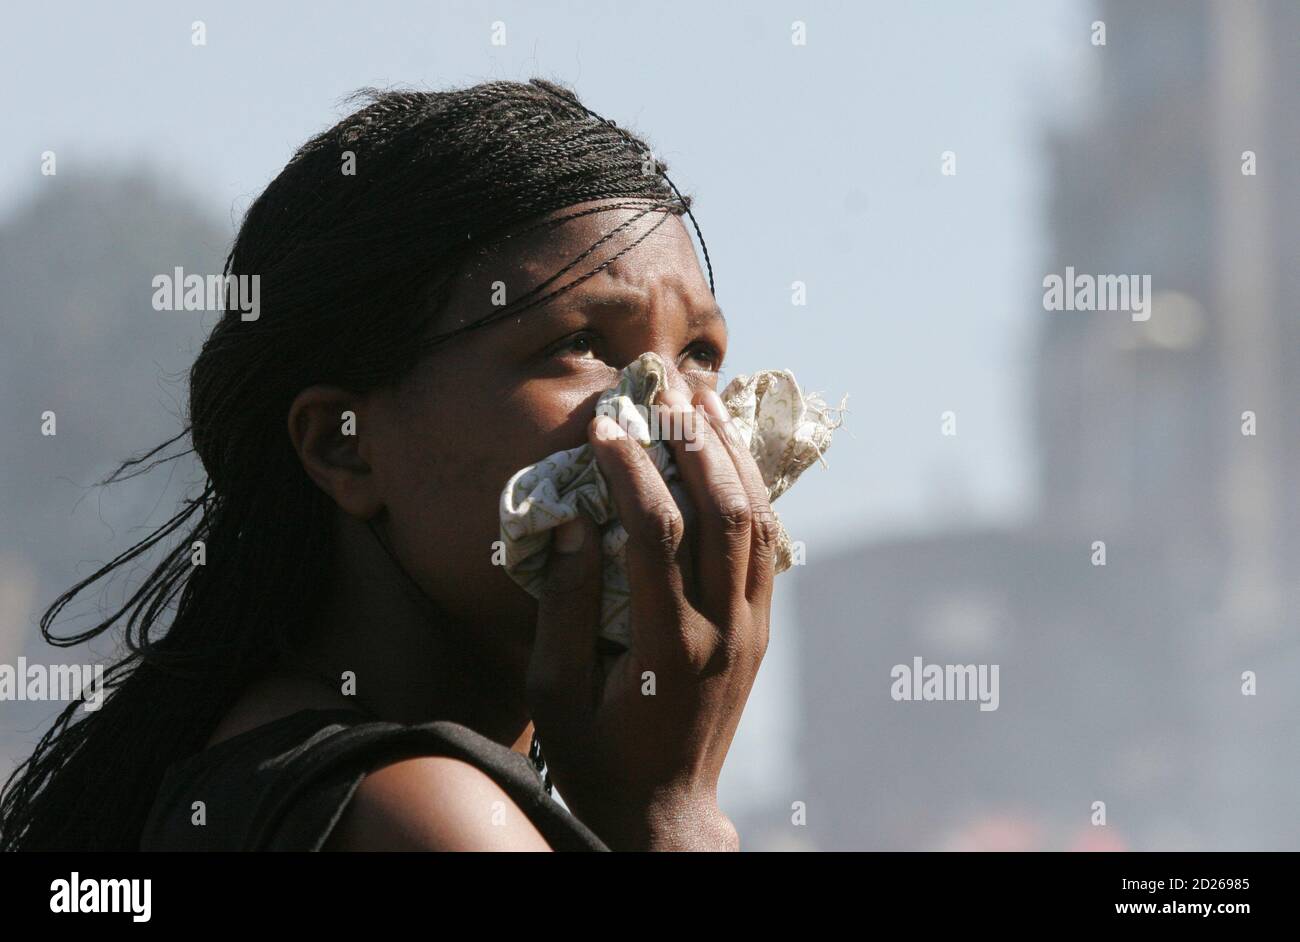 A woman covers her face to protect from teargas during ethnic violence in Nairobi January 2, 2008. President Mwai Kibaki's government accused rival Raila Odinga's party of unleashing 'genocide' in Kenya on Wednesday as the death toll from tribal violence over a disputed election passed 300. REUTERS/Thomas Mukoya   (KENYA) Stock Photo